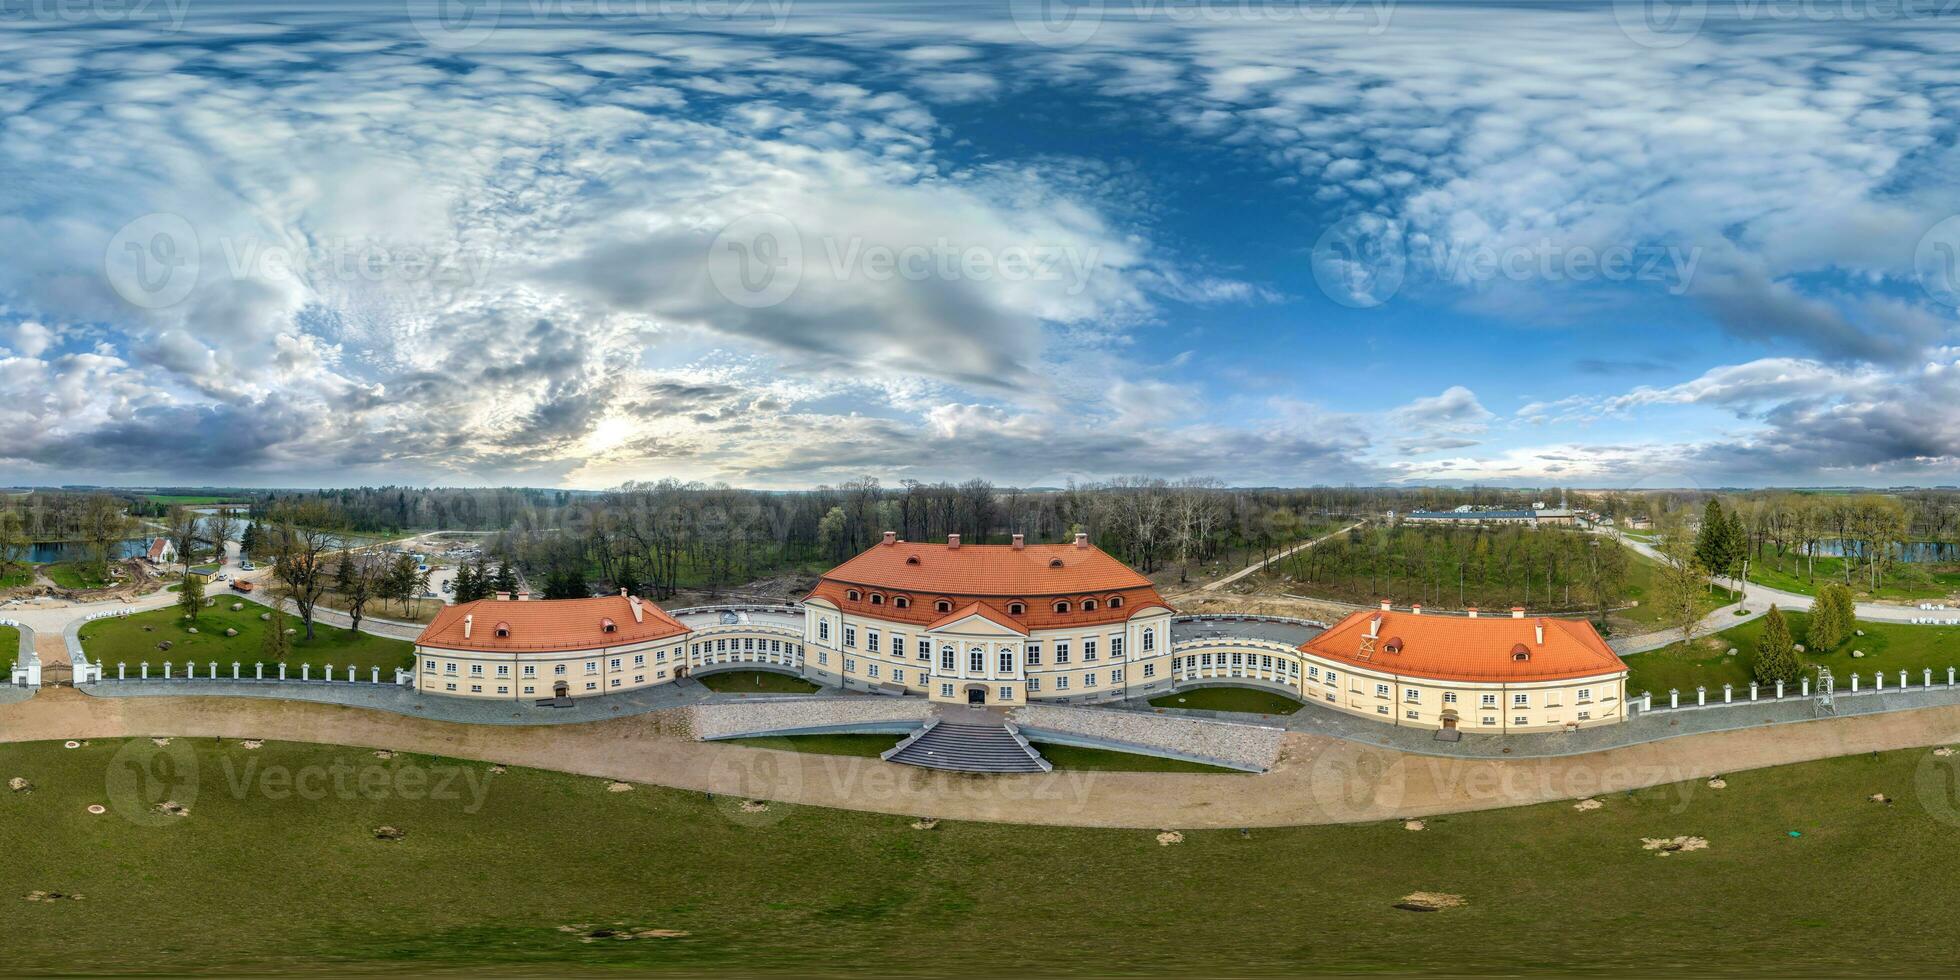 aerial seamless spherical 360 panorama overlooking restoration of the historic castle or palace near lake in equirectangular projection photo